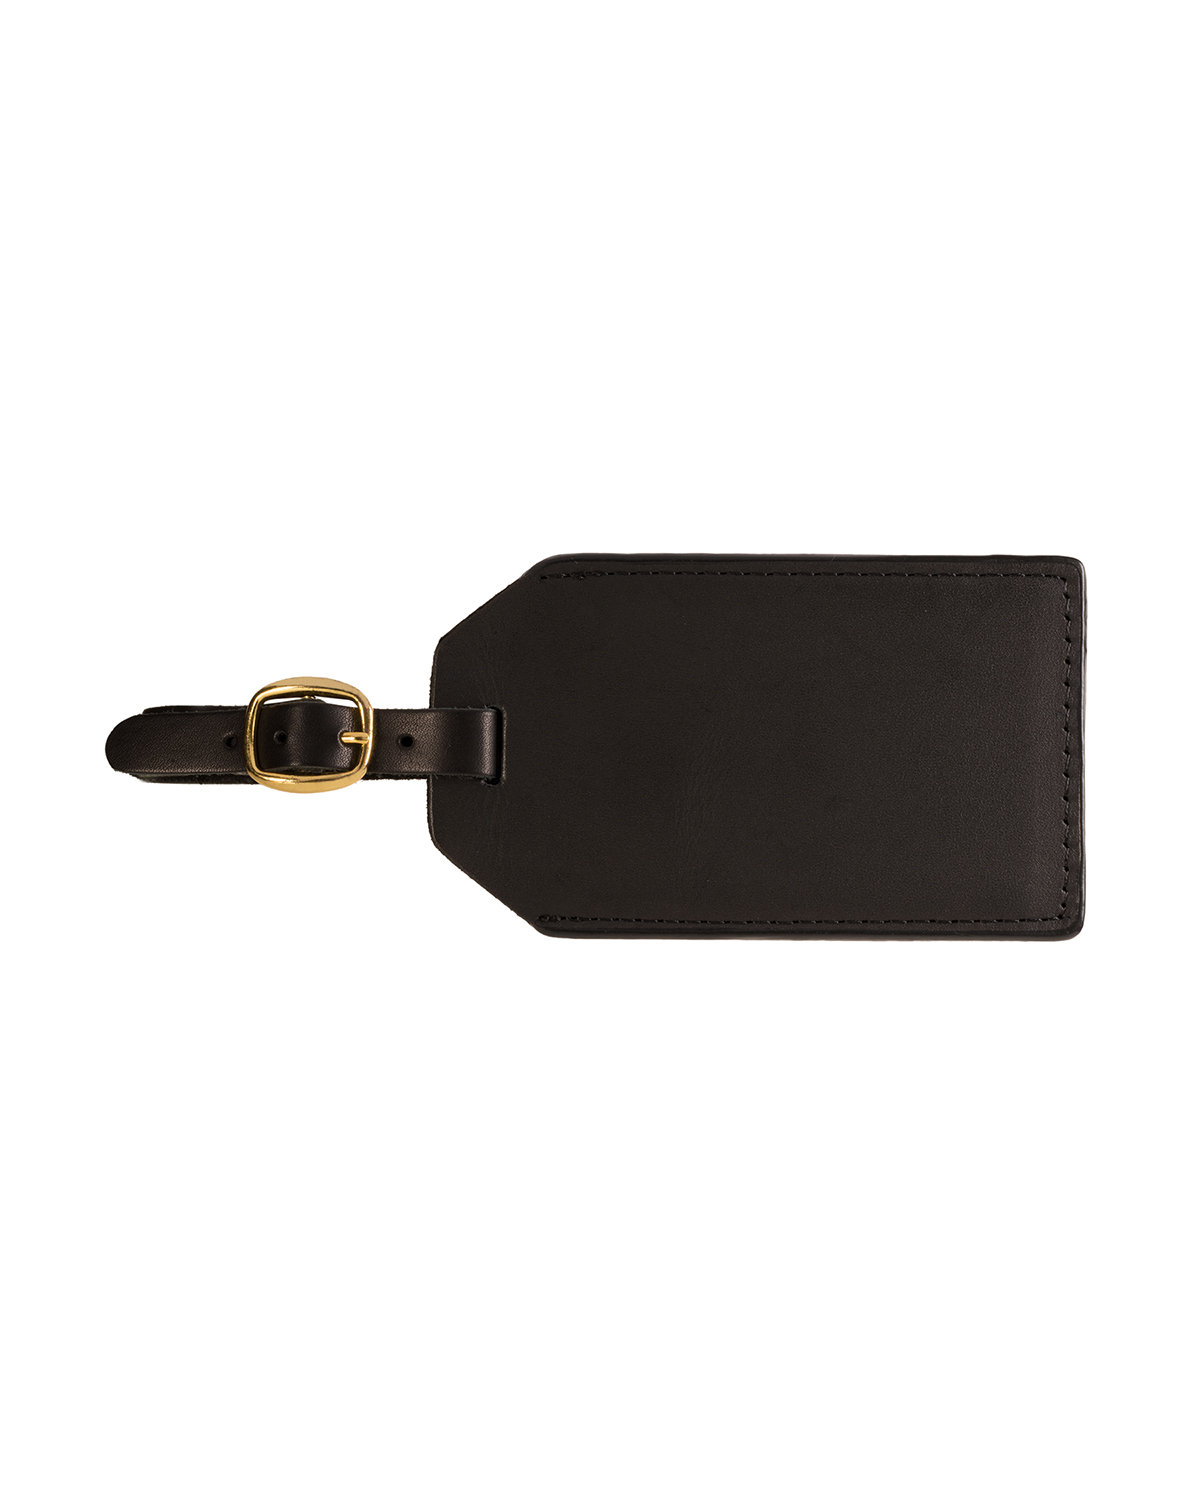 Grand Central Luggage Tag Sueded Leather-Leeman